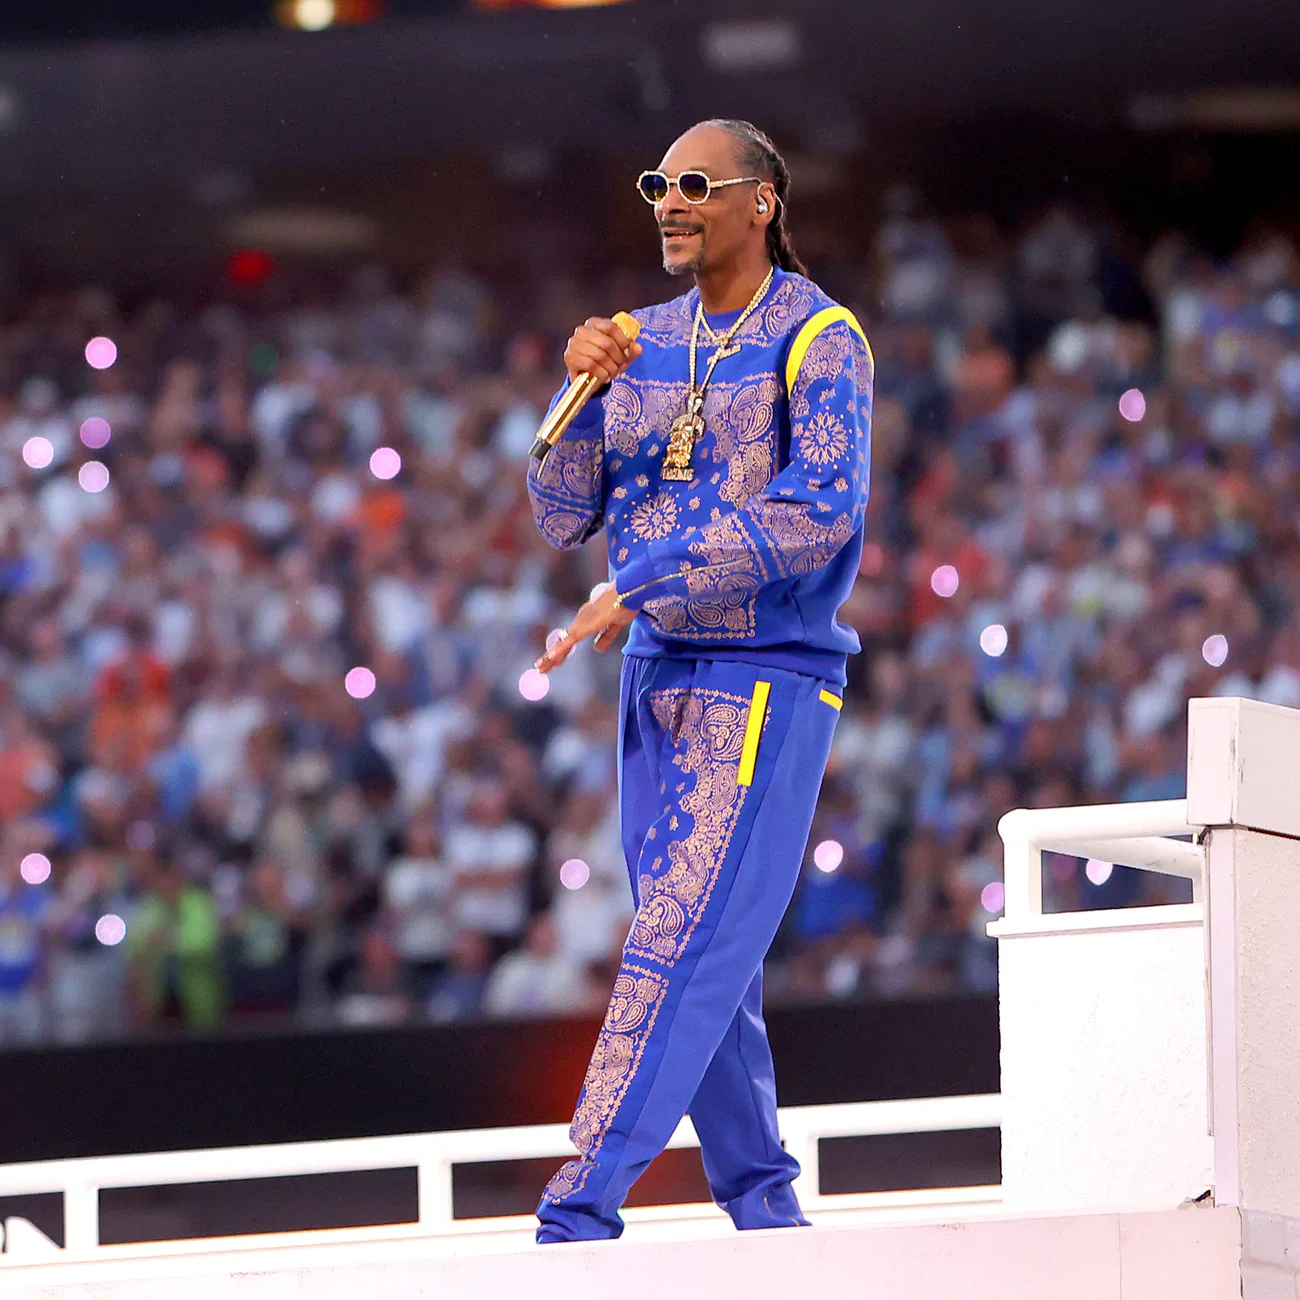 From Streets to Sleek: Snoop Dogg's Tracksuit Revolution